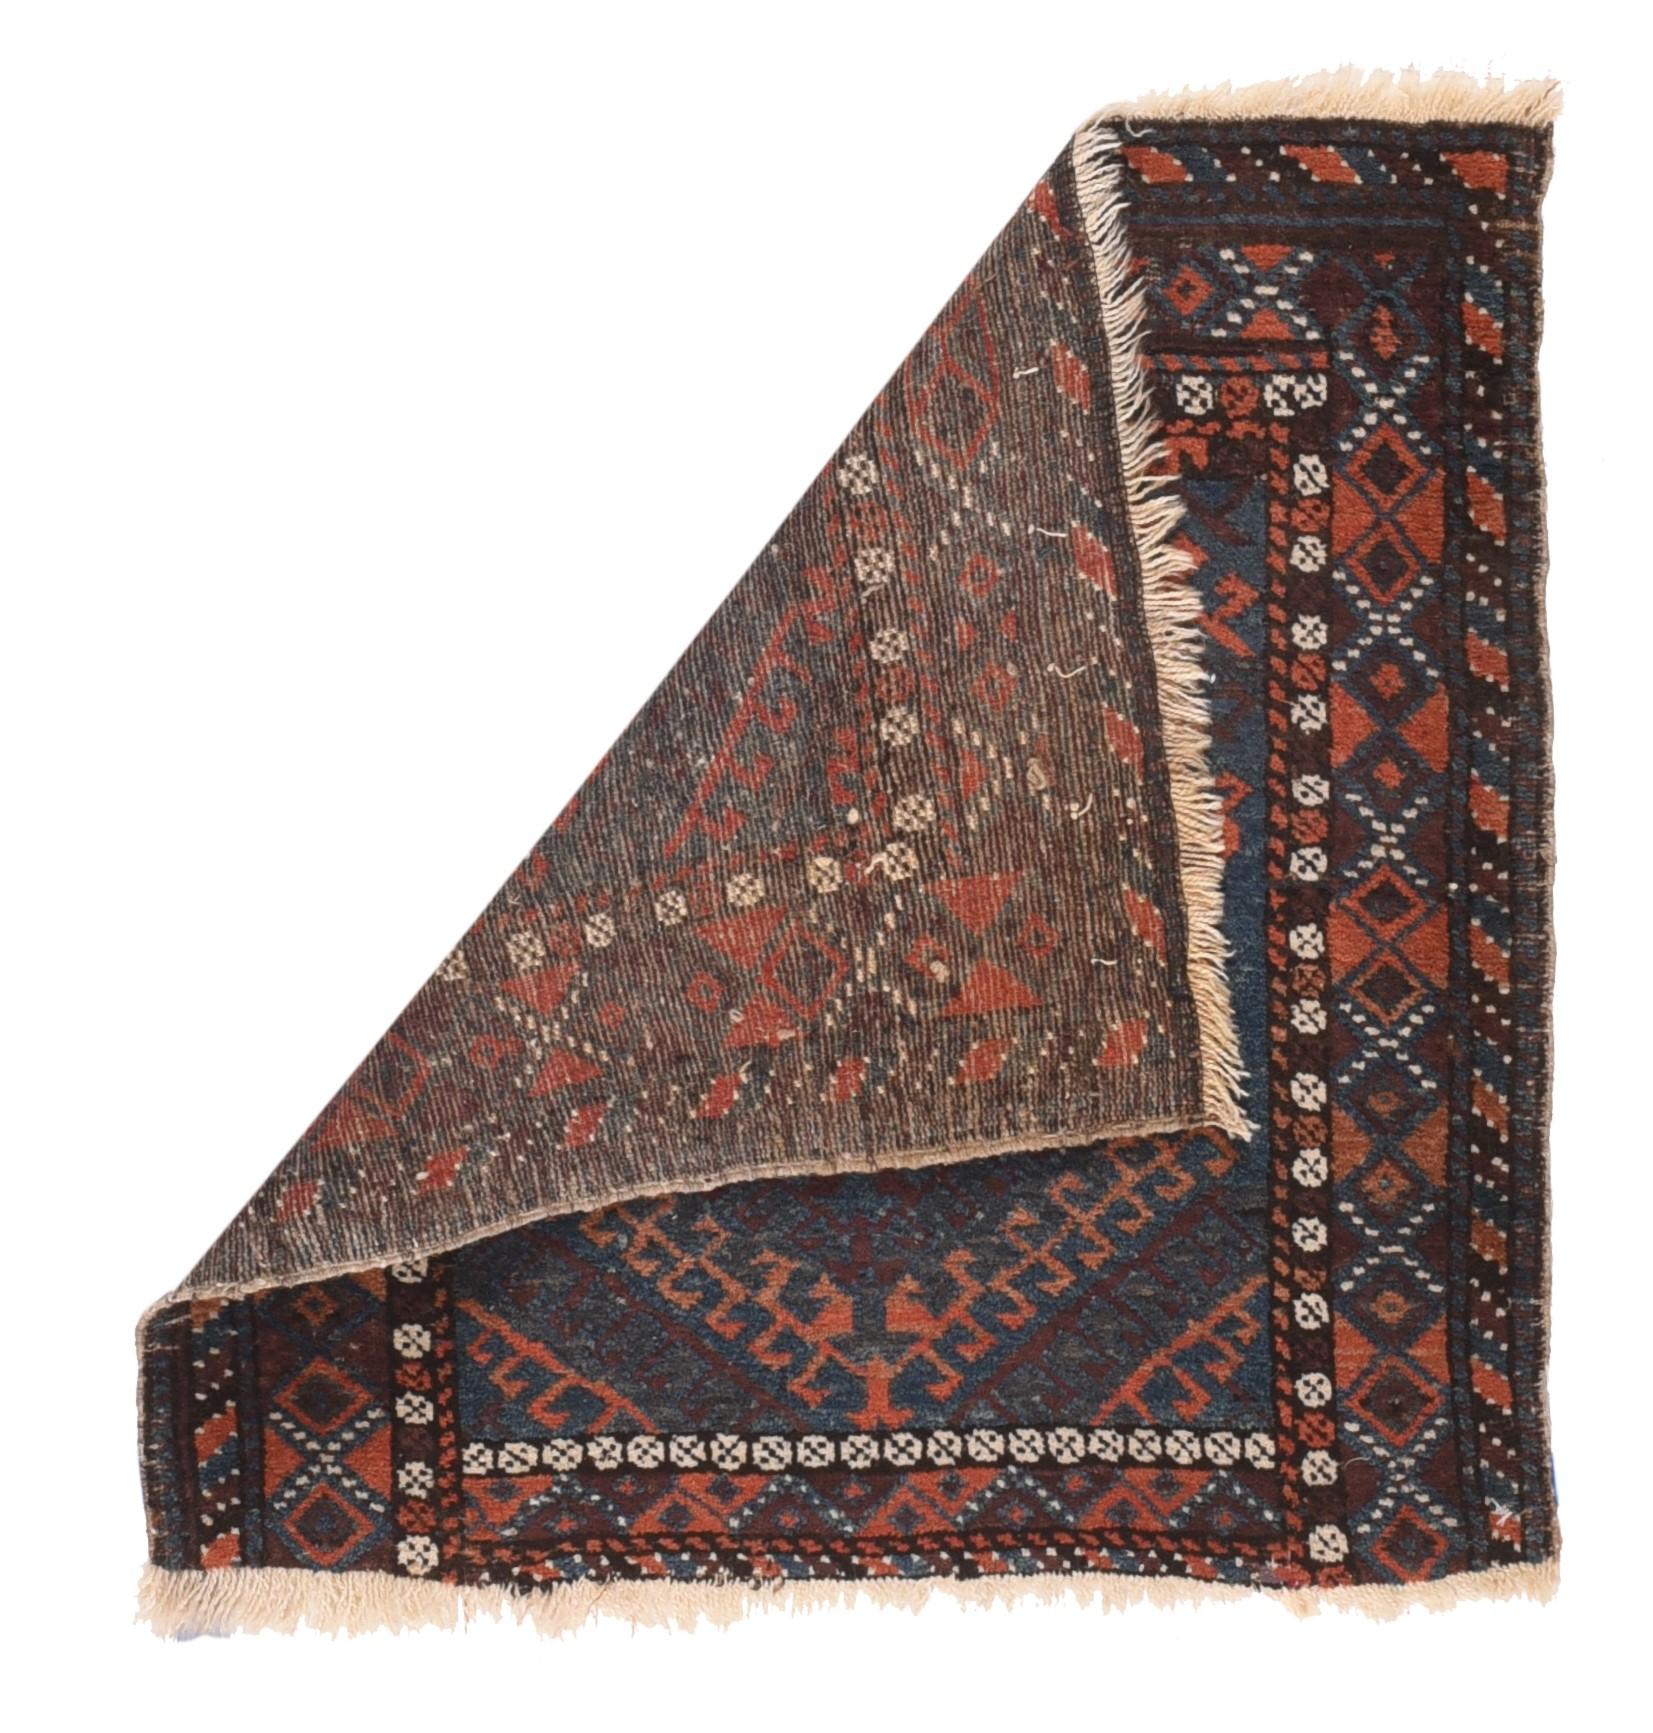 Antique Balouch Back Face Rug 2'1'' x 2'2''. This well-woven, nomadic artefact shows a border of hexagons and smaller diamonds, with a rosette inner stripe, all surrounding the layered field with rust-red, blue and aubergine ashiks and hooked